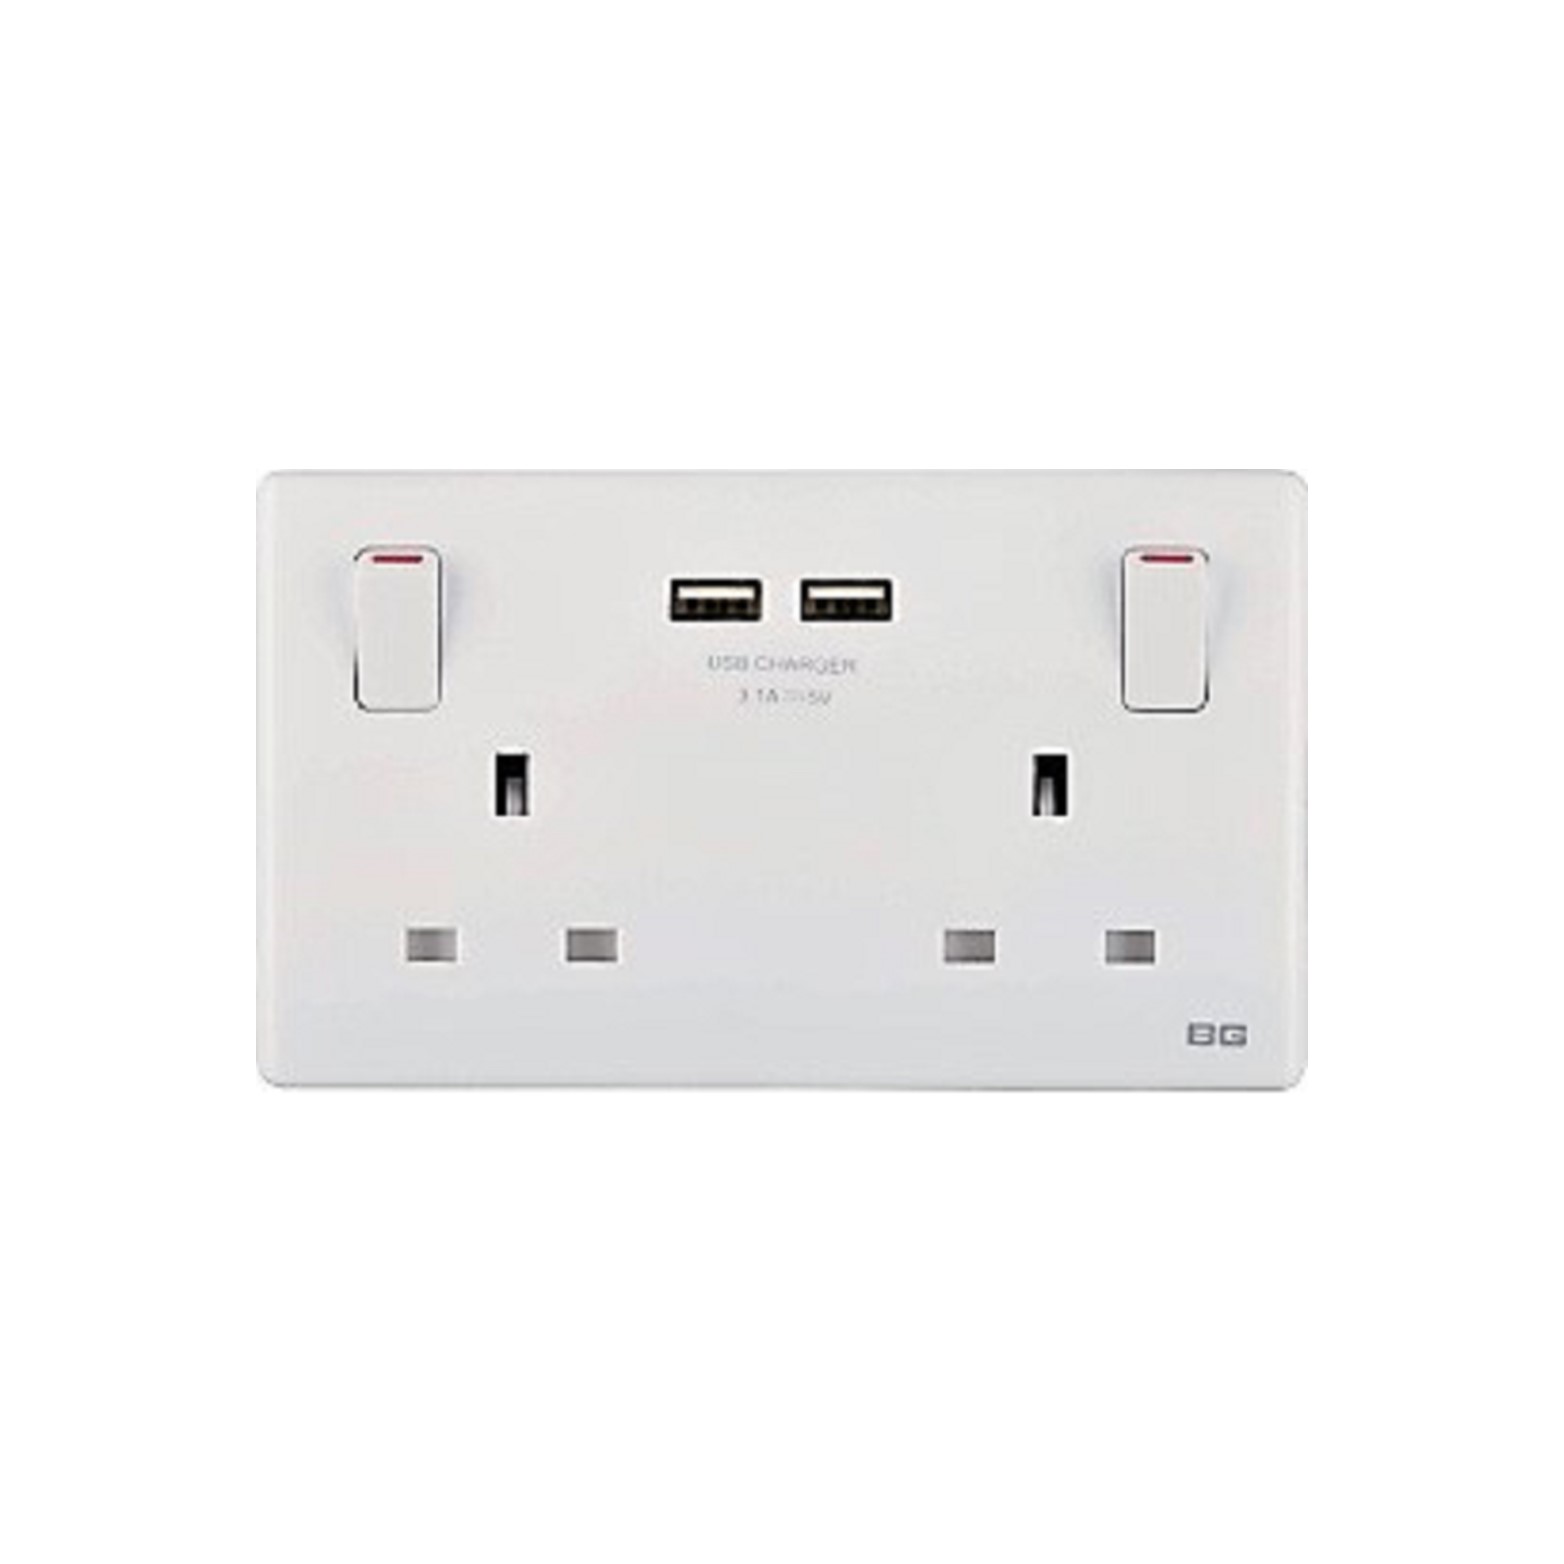 Silver SlimLine 2USB 3.1A 2-Gang 13A Switched Socket, USB Charger 86 type wall BS/UK (PCSL22U3)